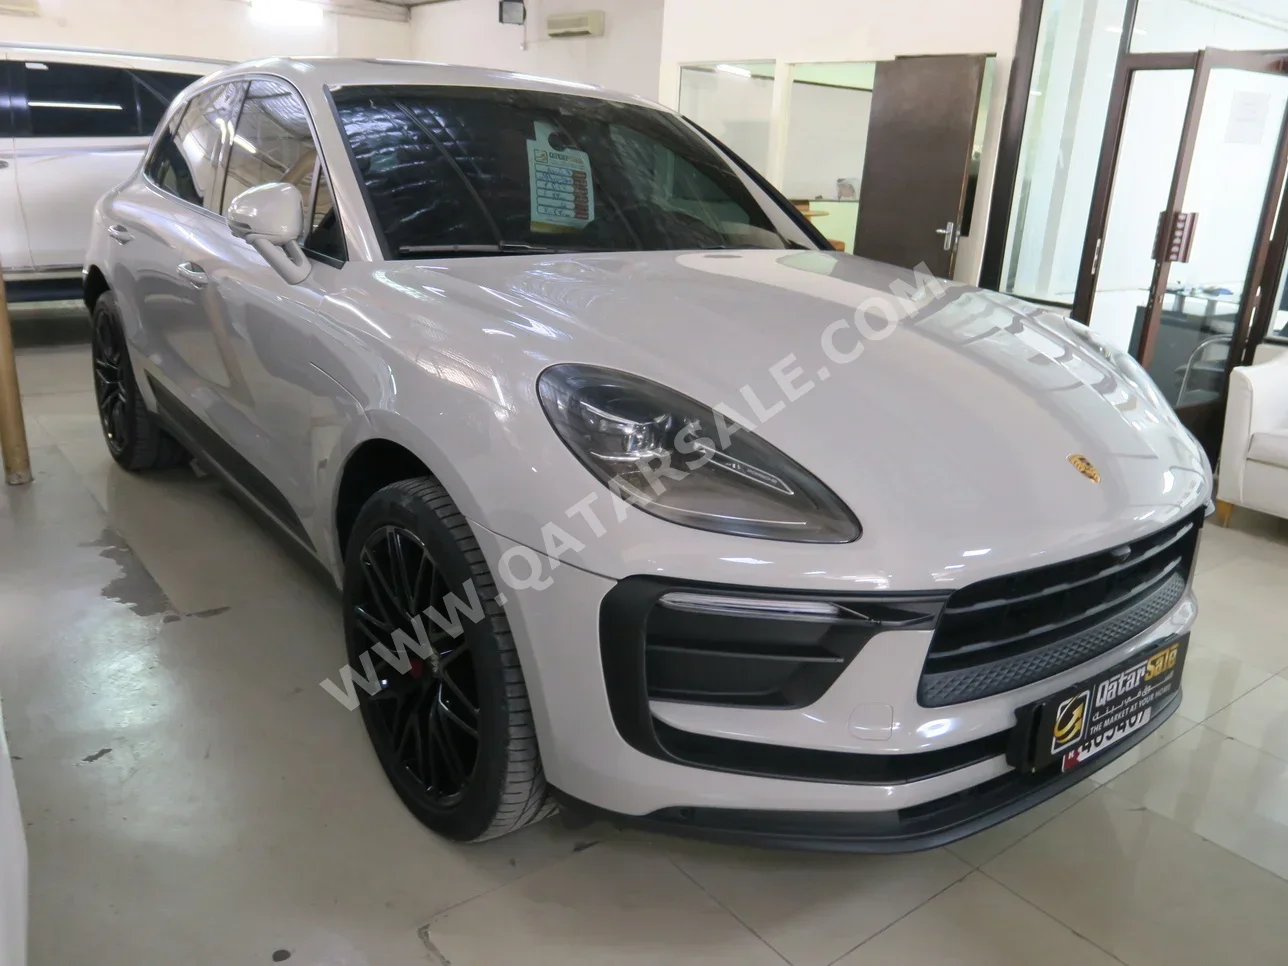 Porsche  Macan  2022  Automatic  34,000 Km  4 Cylinder  Four Wheel Drive (4WD)  SUV  Silver  With Warranty